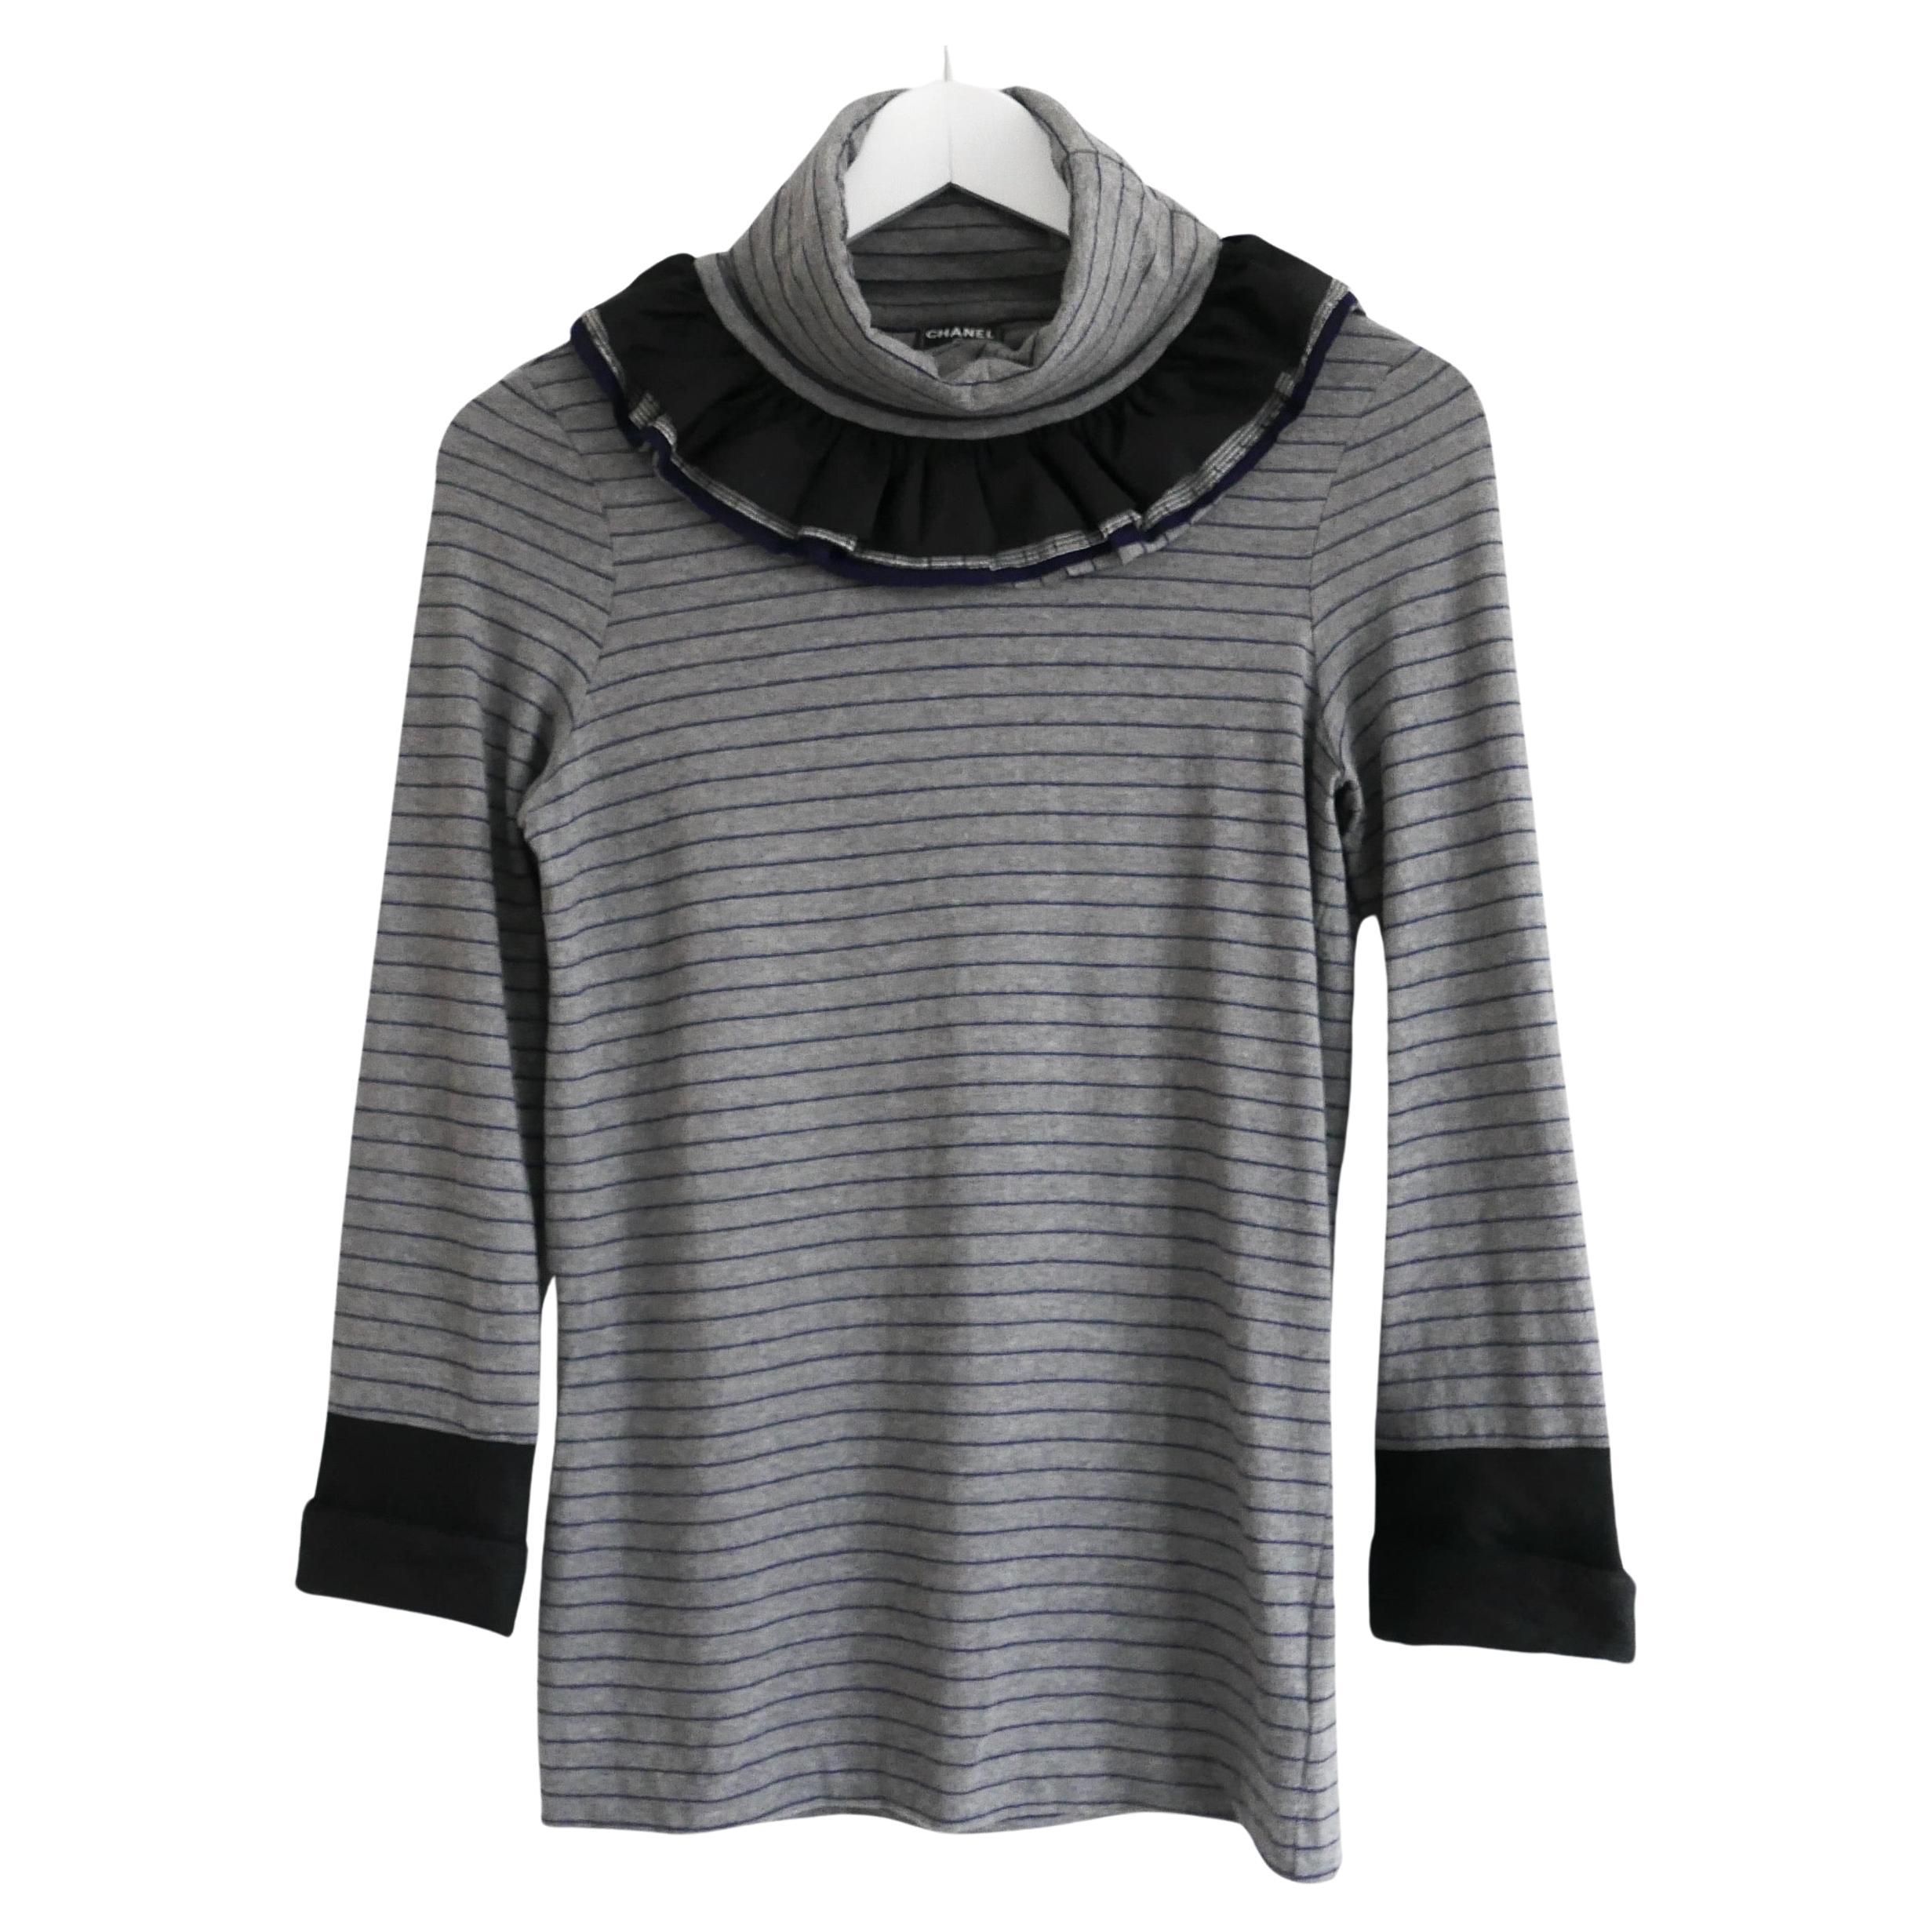 Chanel Fall 2008 Ruffle Frilled Neck Striped Jersey Top For Sale